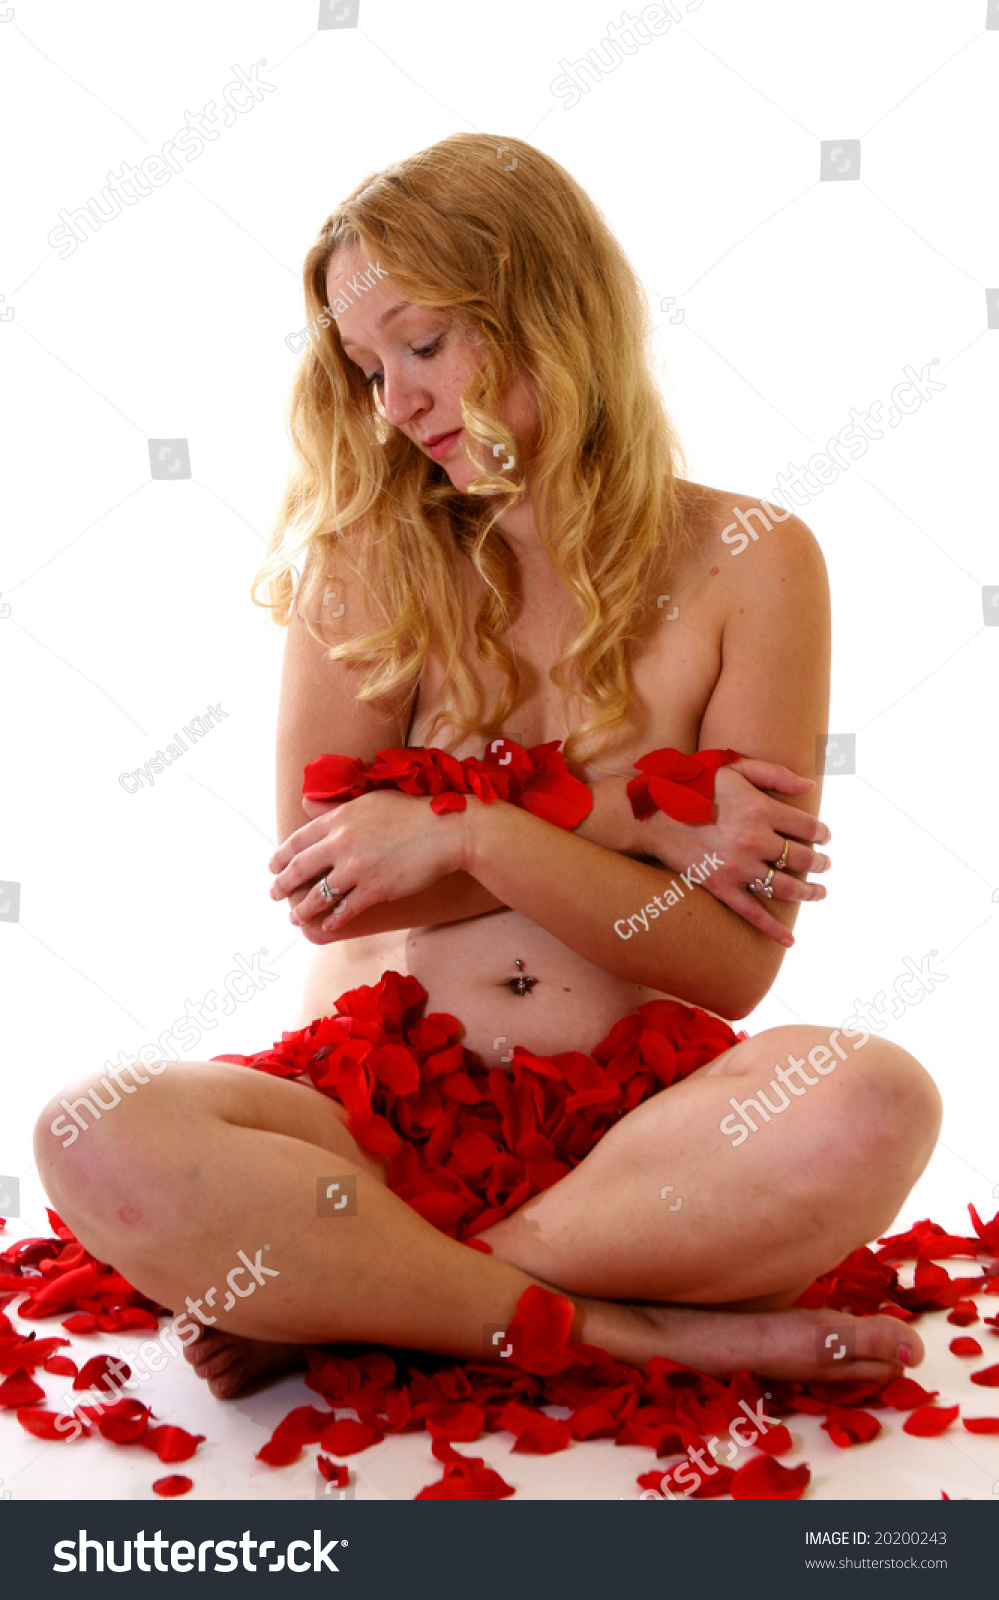 Woman On A Bed Of Rose Petals Stock Image - Image of 